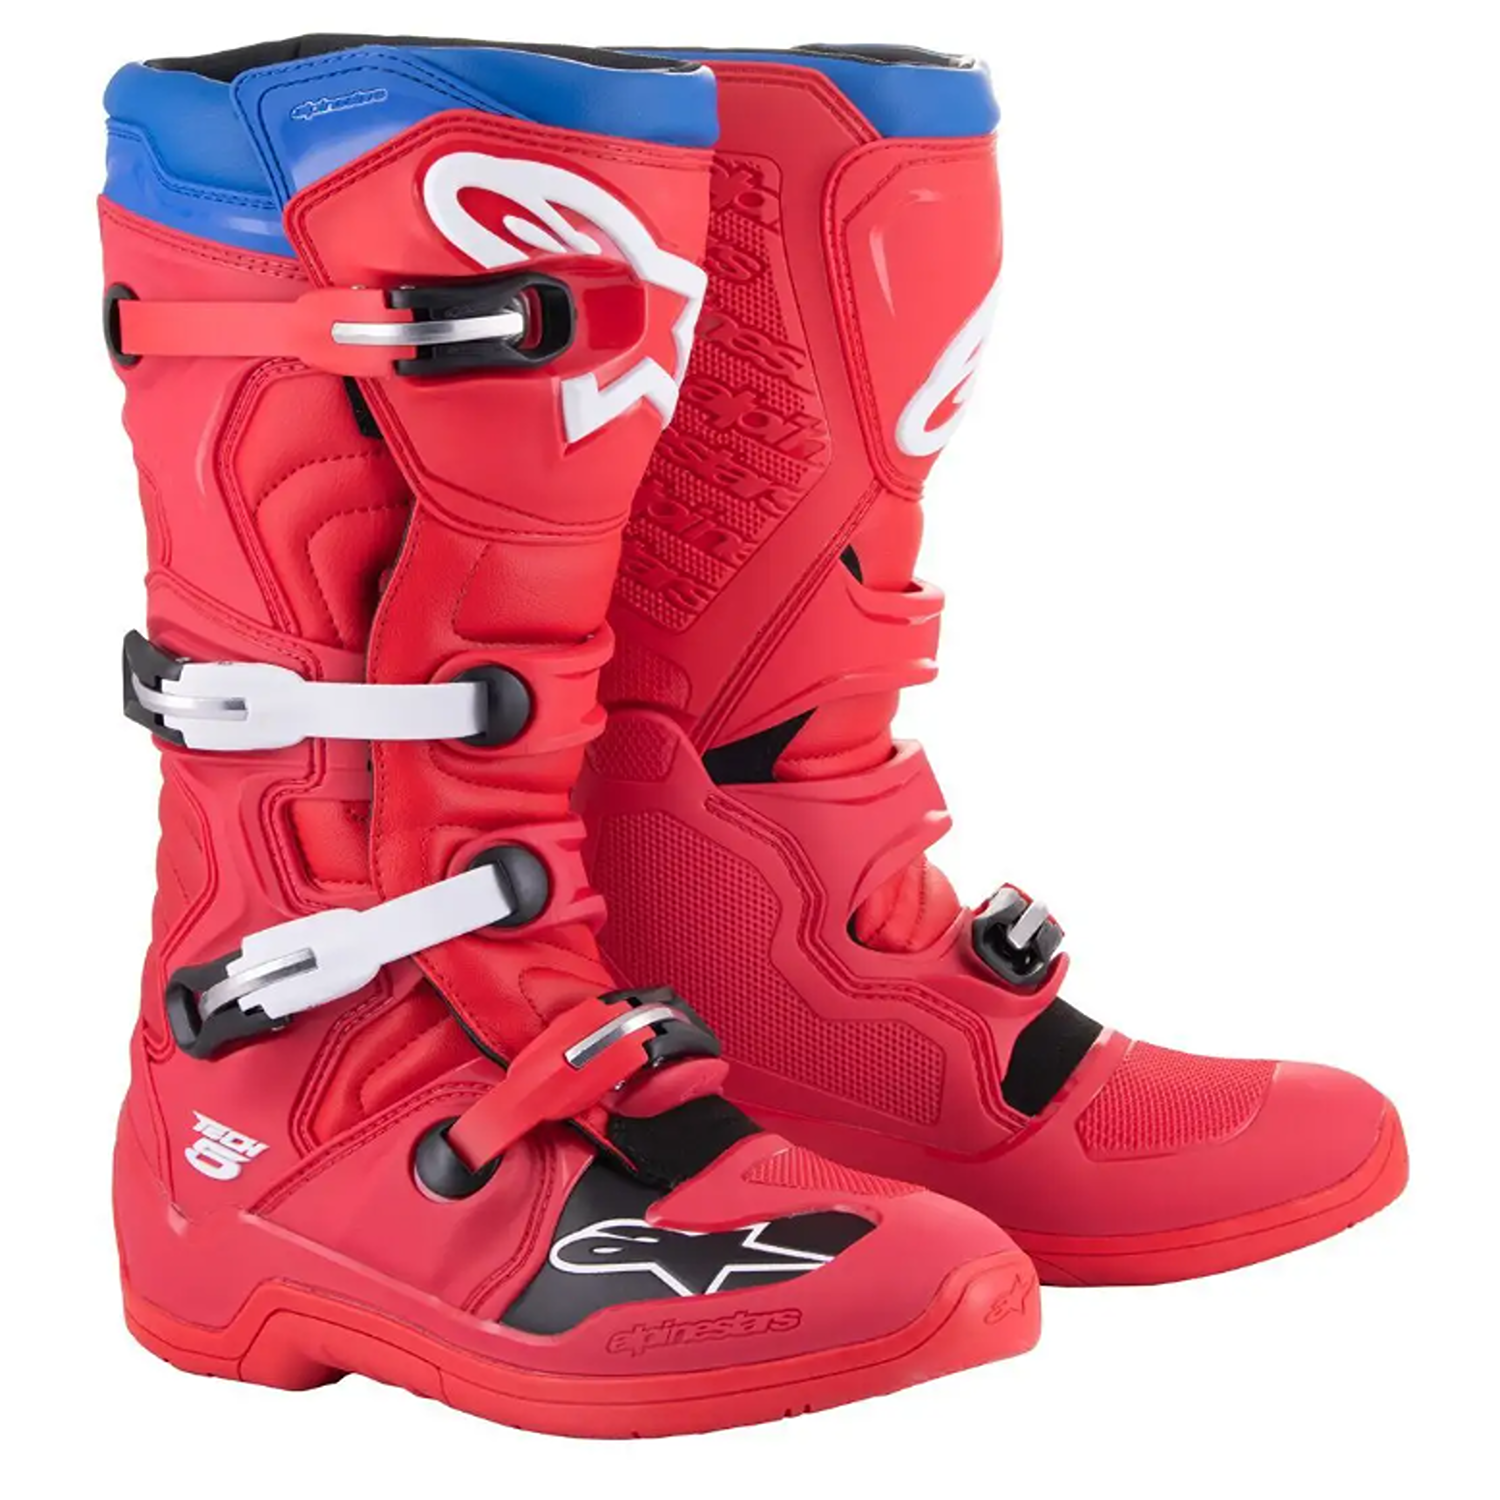 Image of EU Alpinestars Tech 5 Boots Bright Red Dark Red Blue Taille US 14